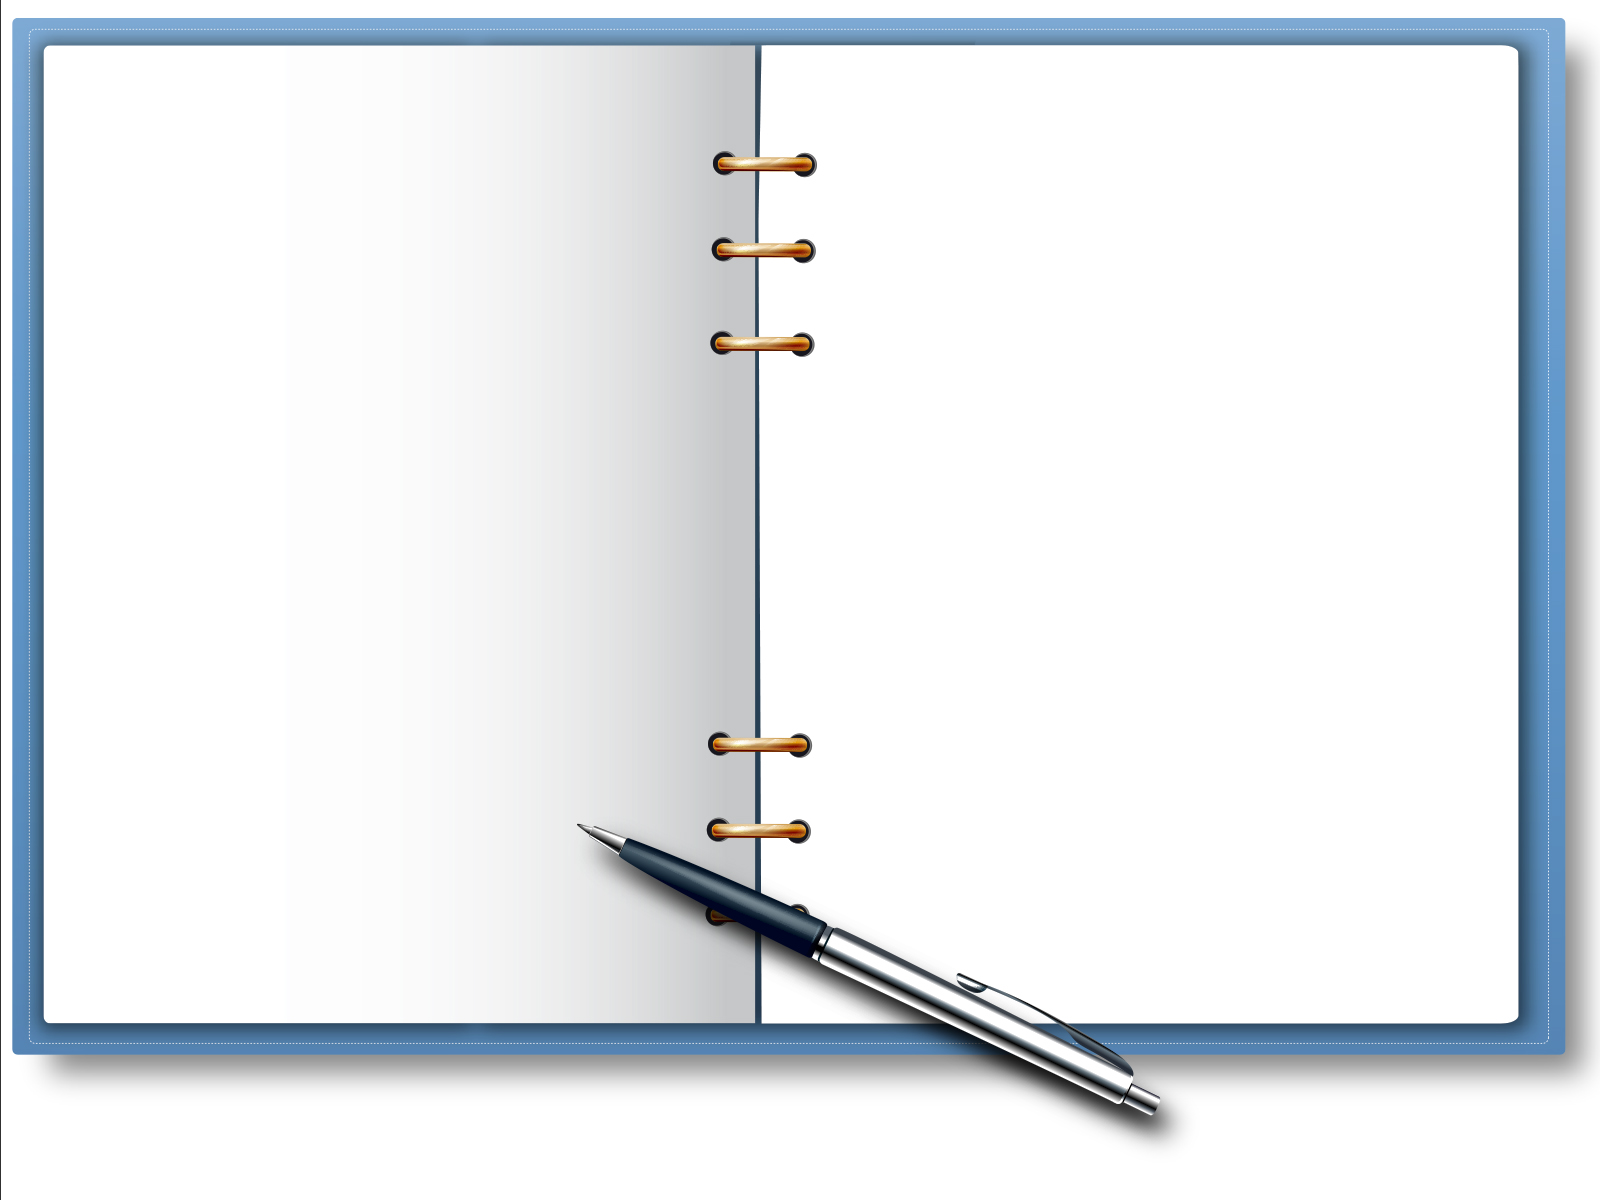 Daily Notebook and Pen Background. Black, Blue, Educational, White. Free PPT Grounds